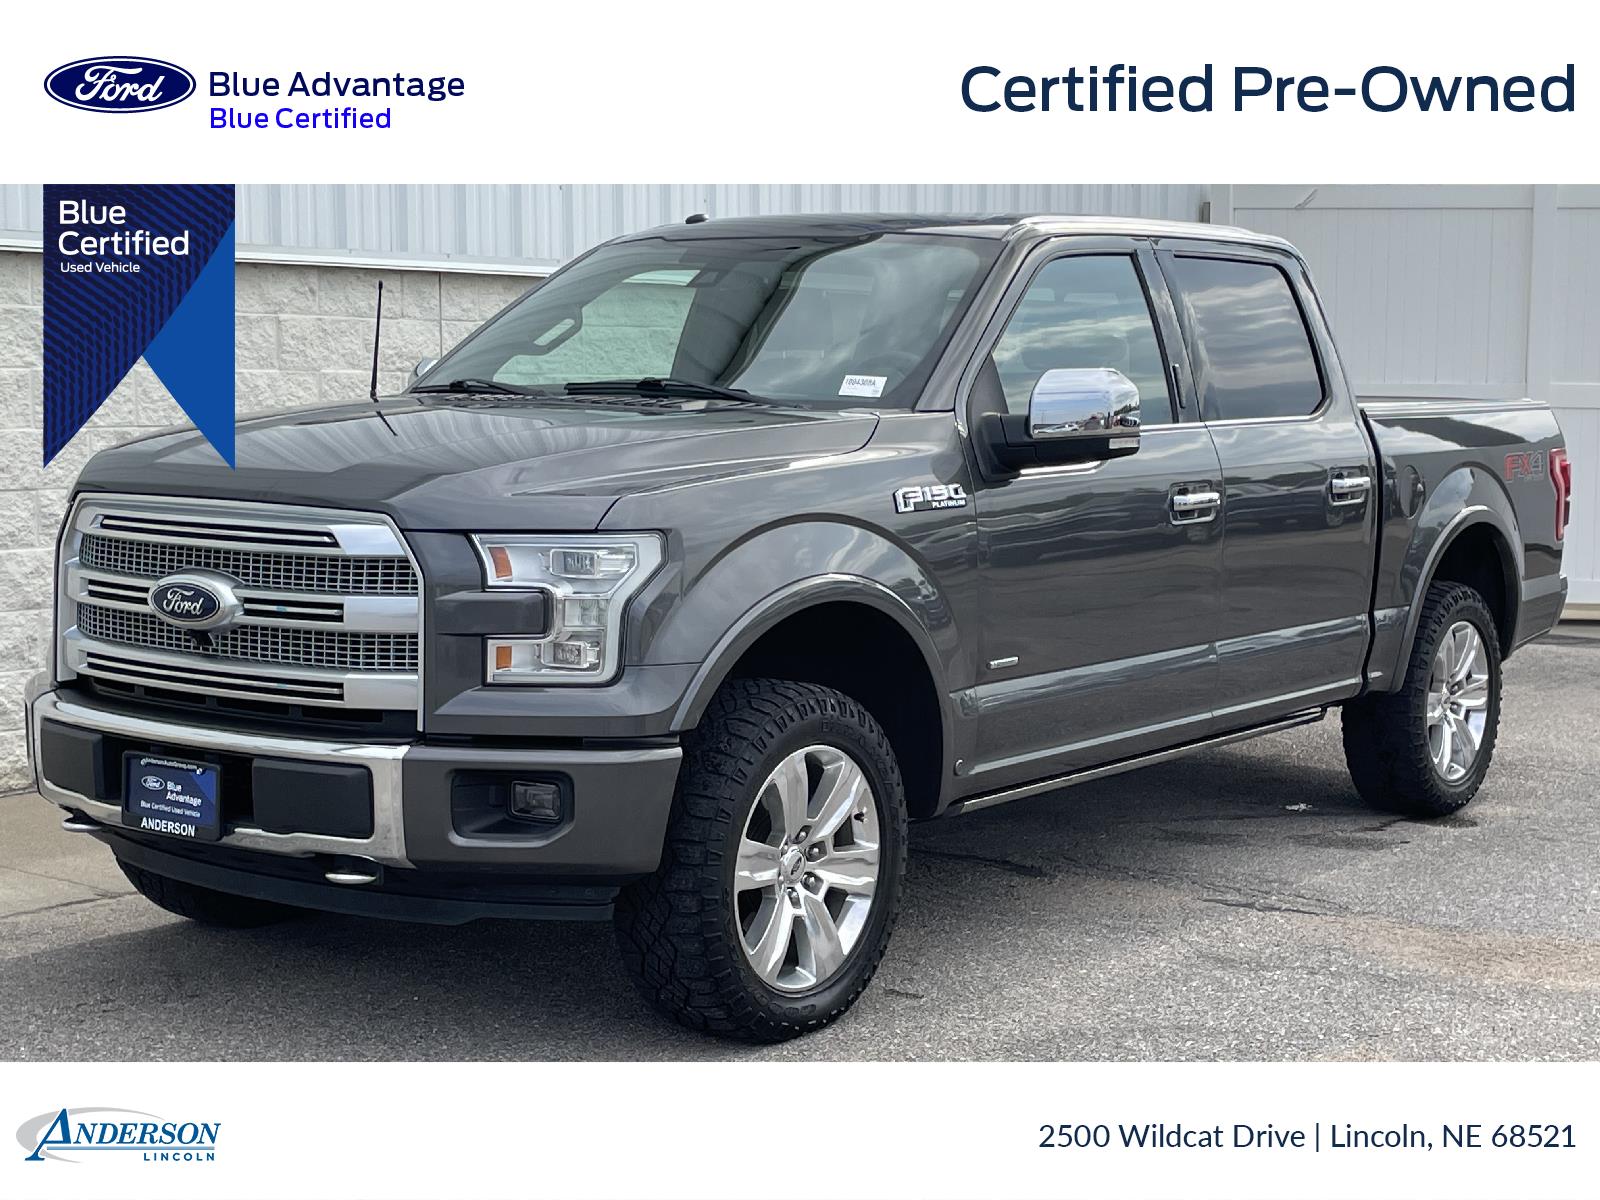 Used 2017 Ford F-150 Platinum Stock: 1004308A